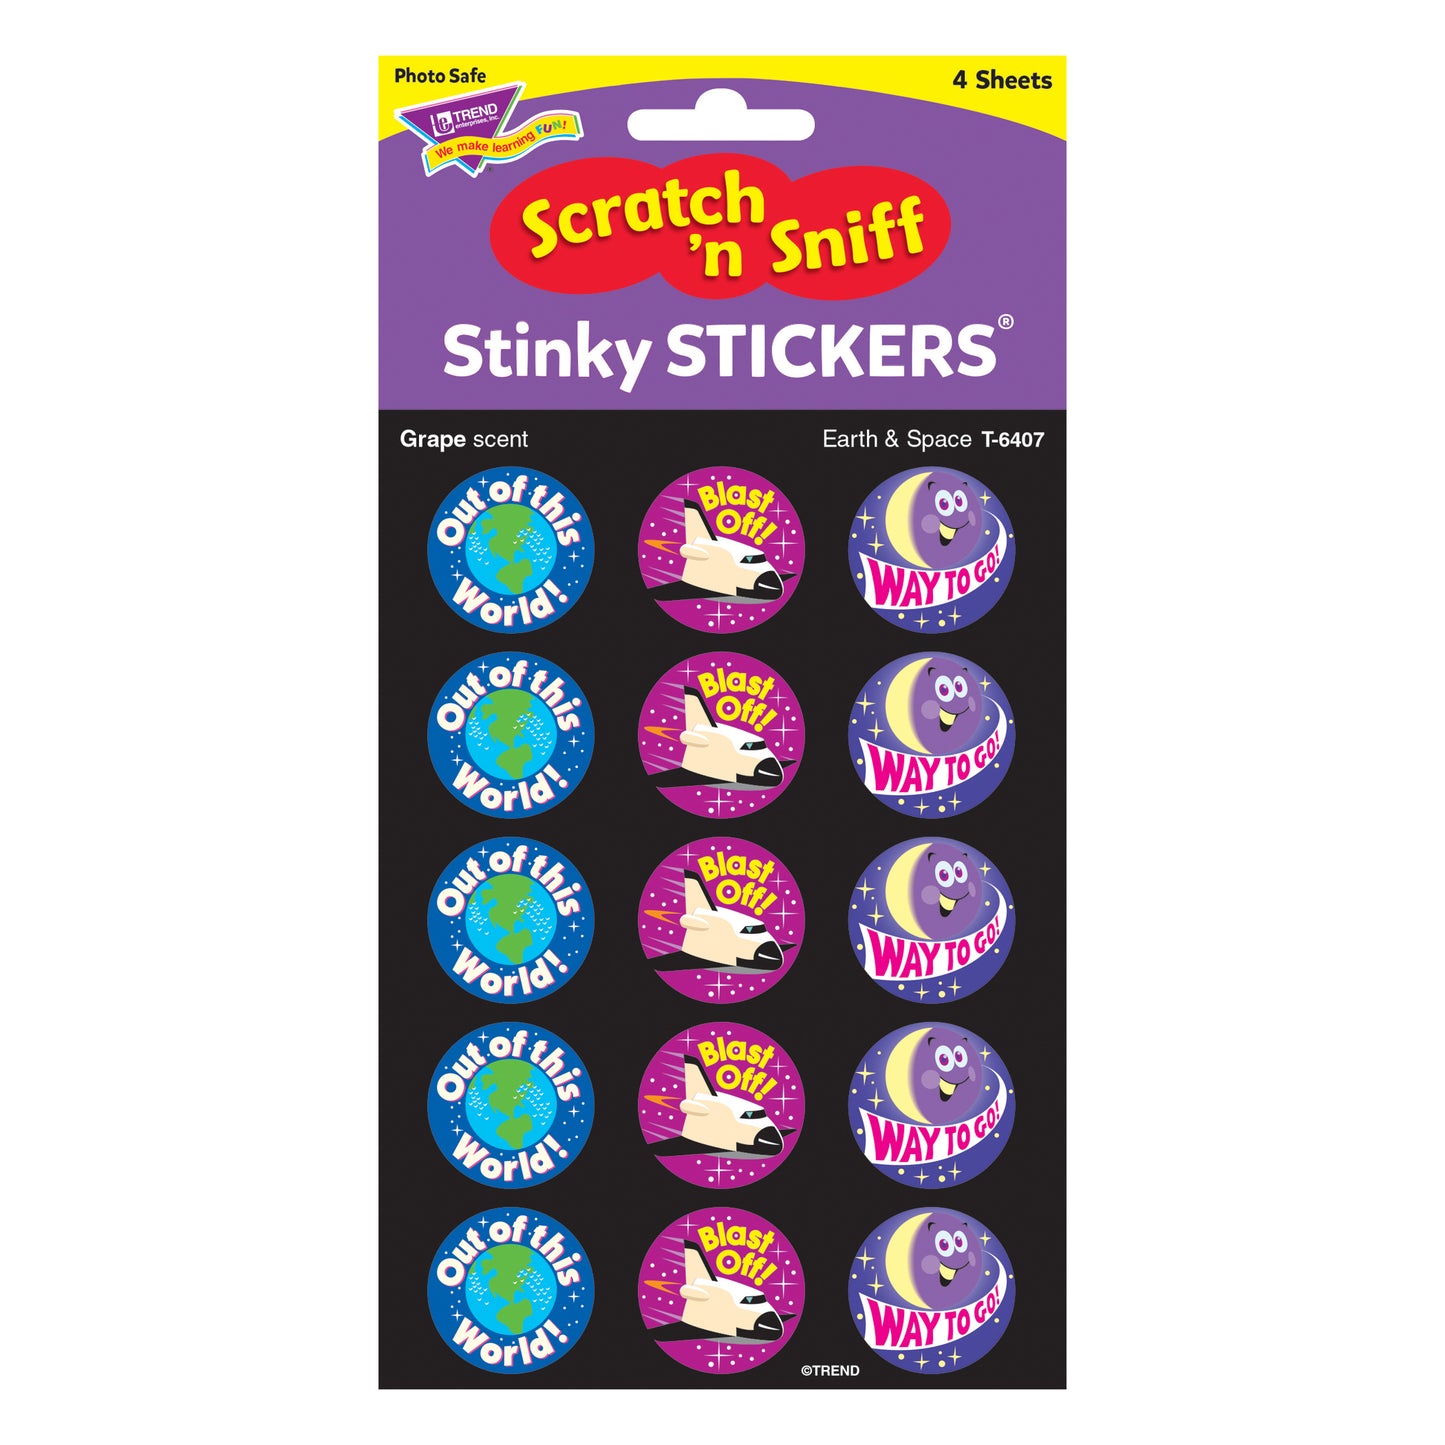 Earth & Space/Grape Stinky Stickers®, 60 Per Pack, 12 Packs